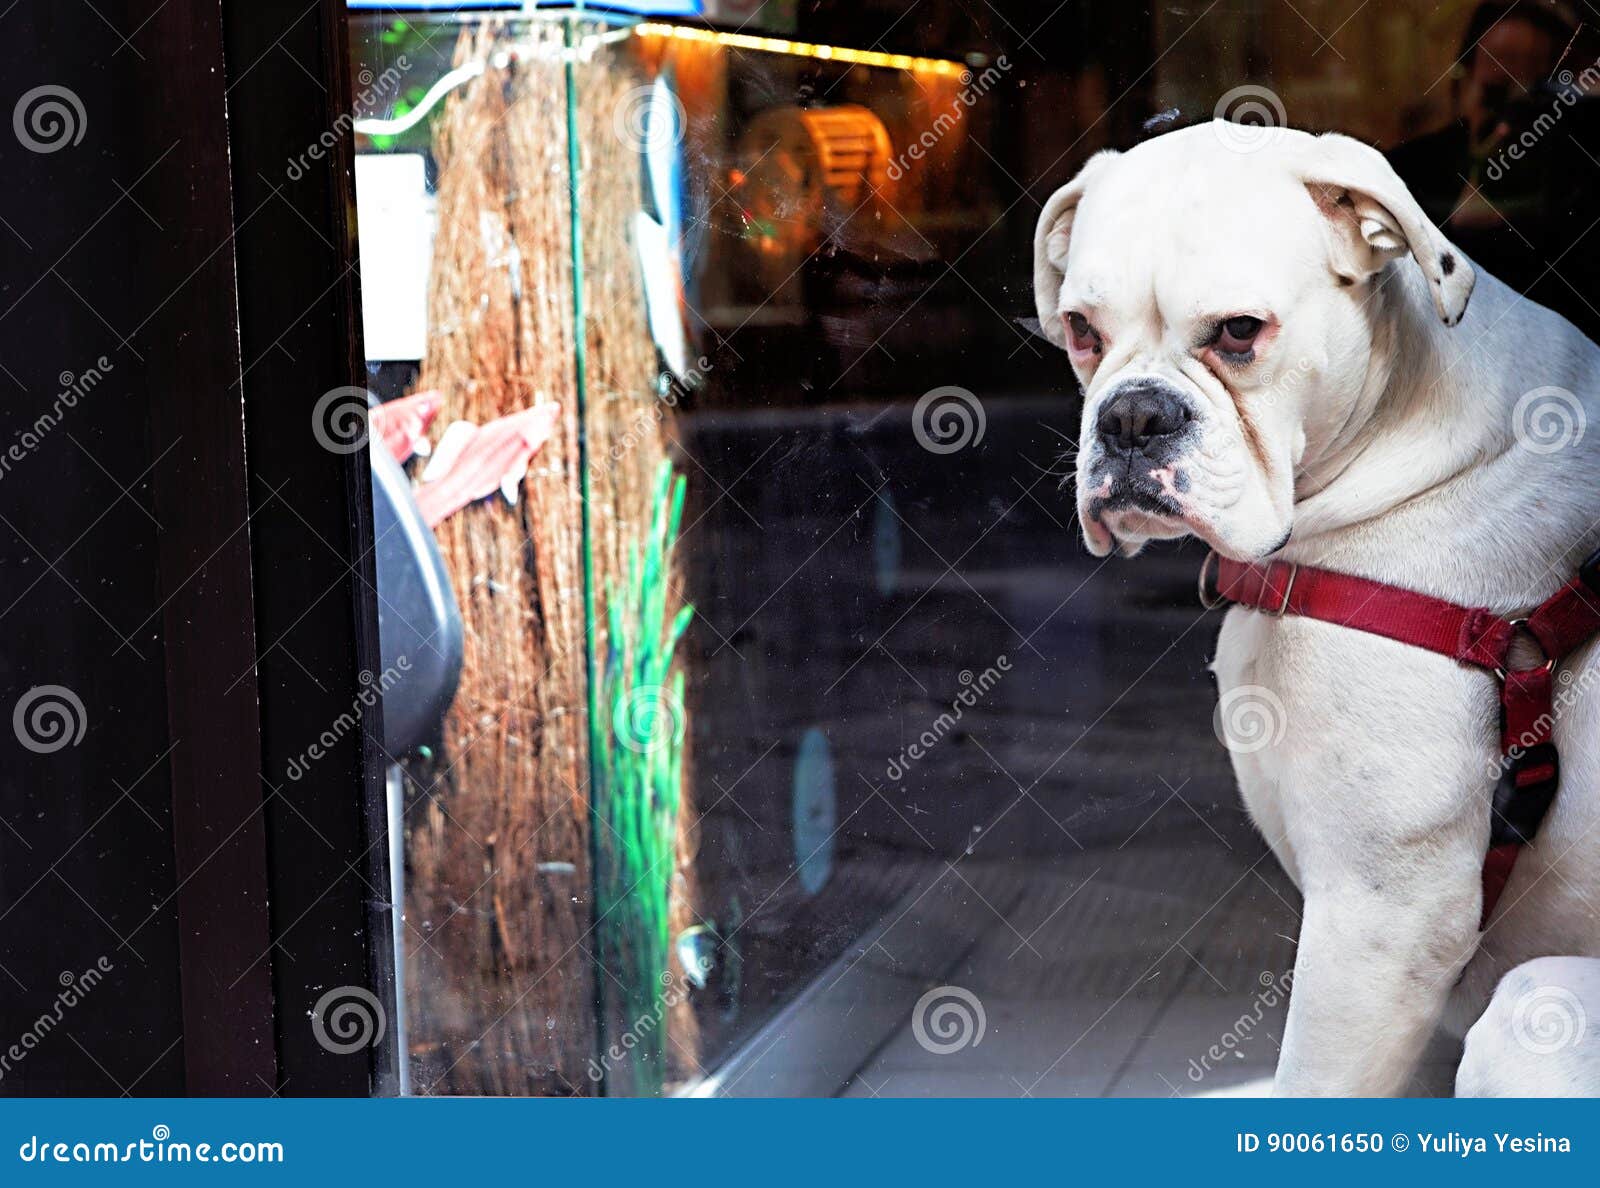 A White Boxer Dog Looking At The Window Stock Photo Image of animal, portrait 90061650